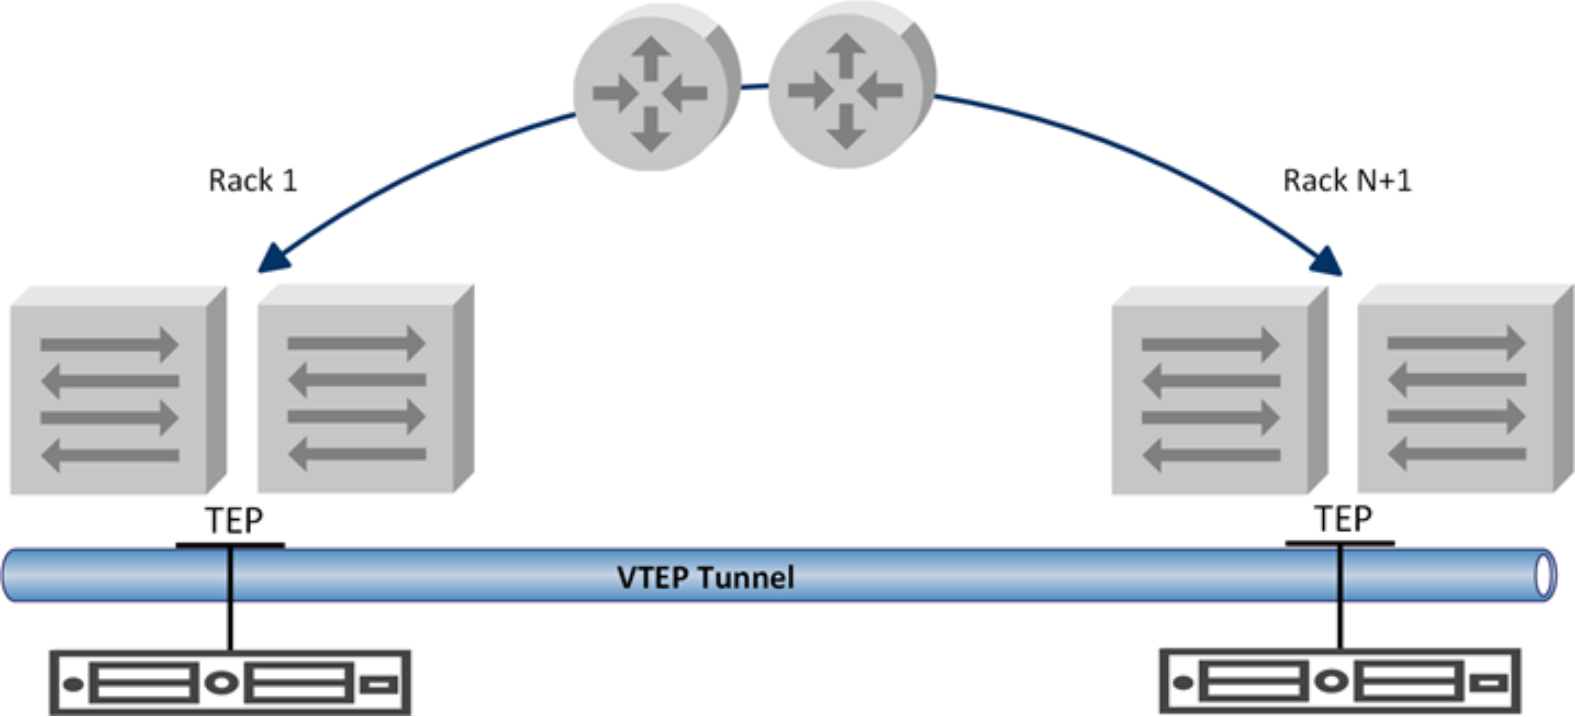 This figure shows the VTEP tunnel network supporting multi-rack deployment.